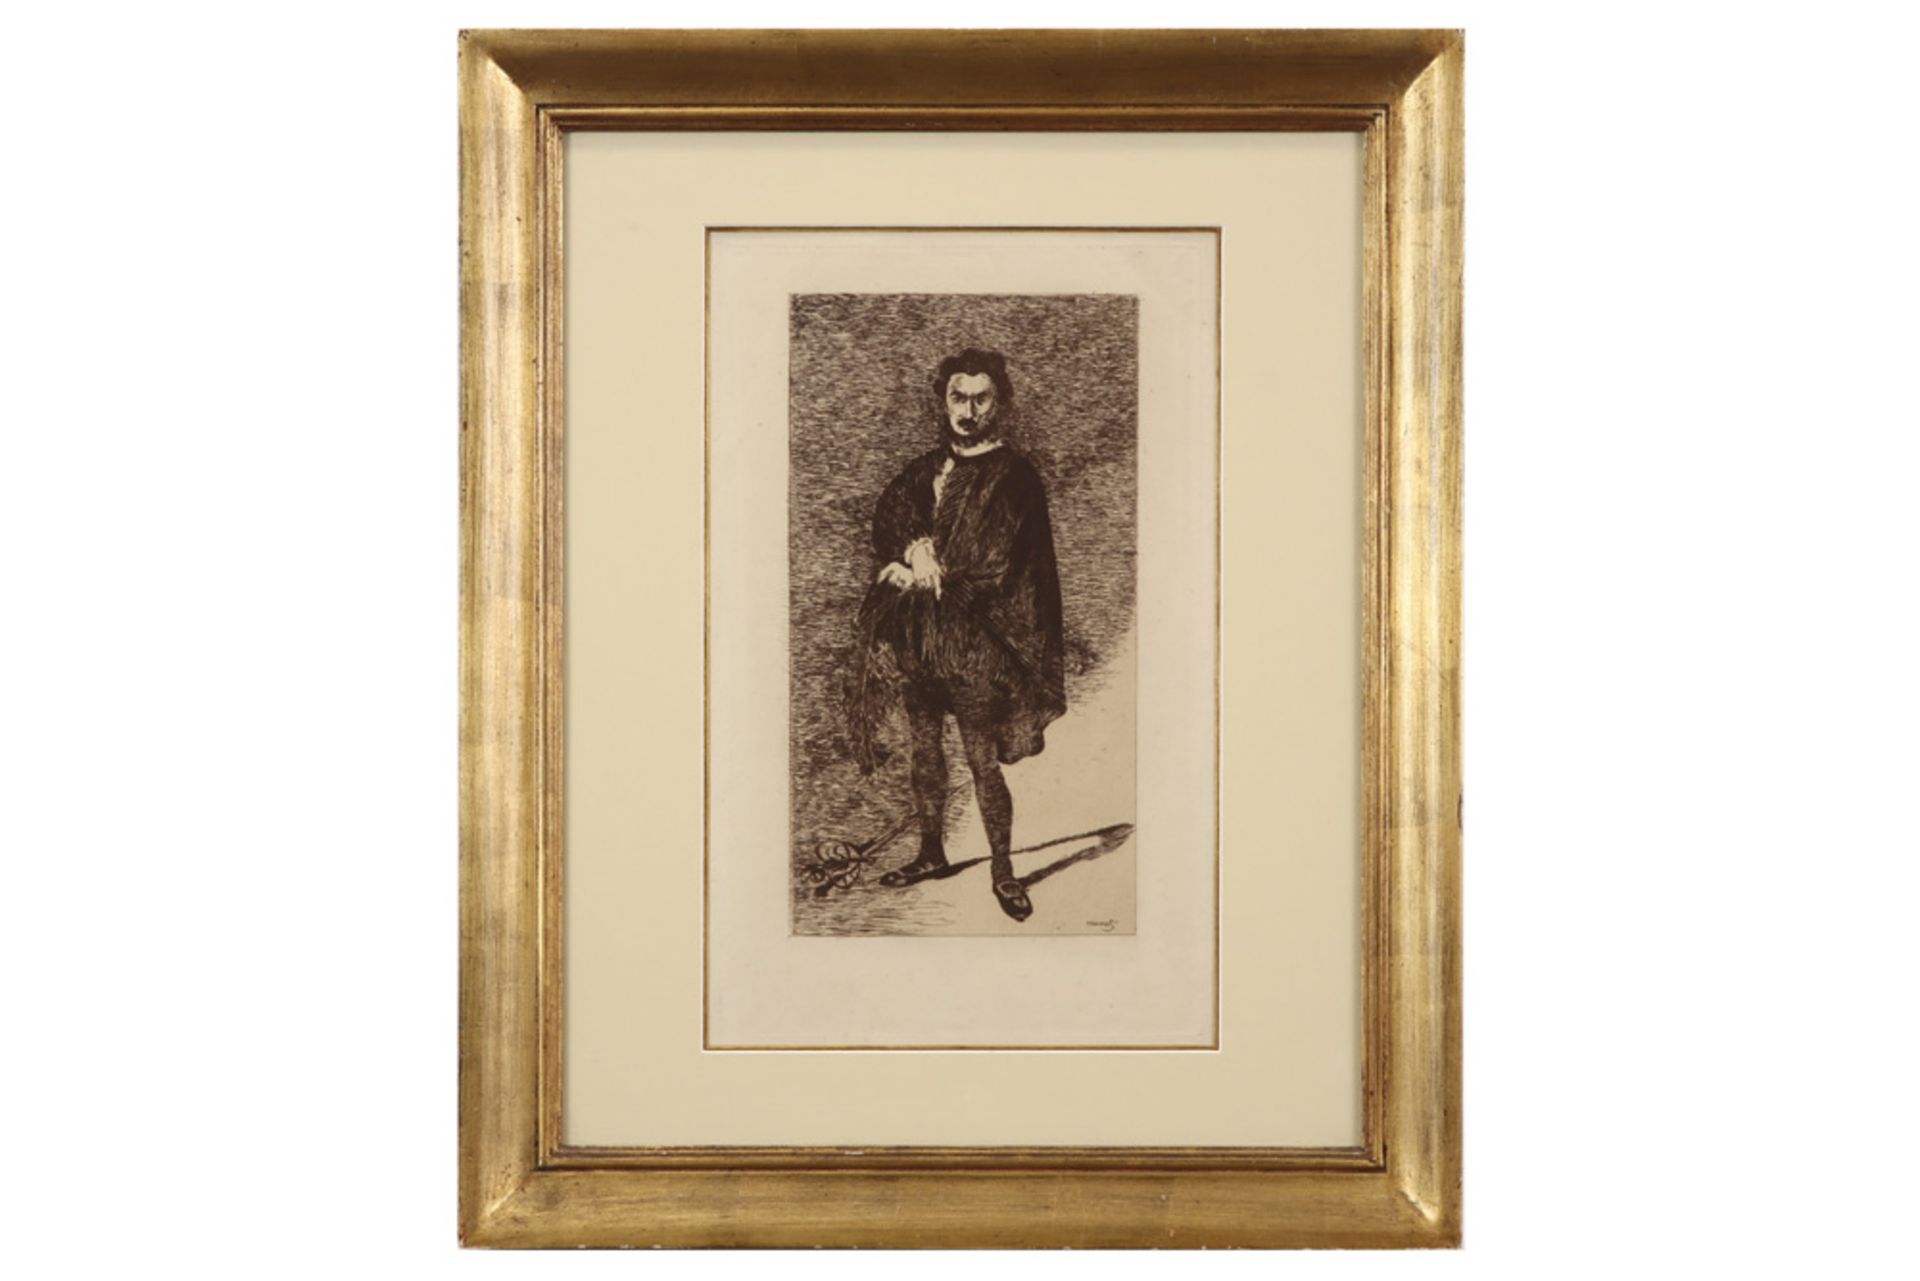 Edouard Manet plate signed etching of Rouvière in a Hamlet costume ||MANET EDOUARD (1832 - 1883) ets